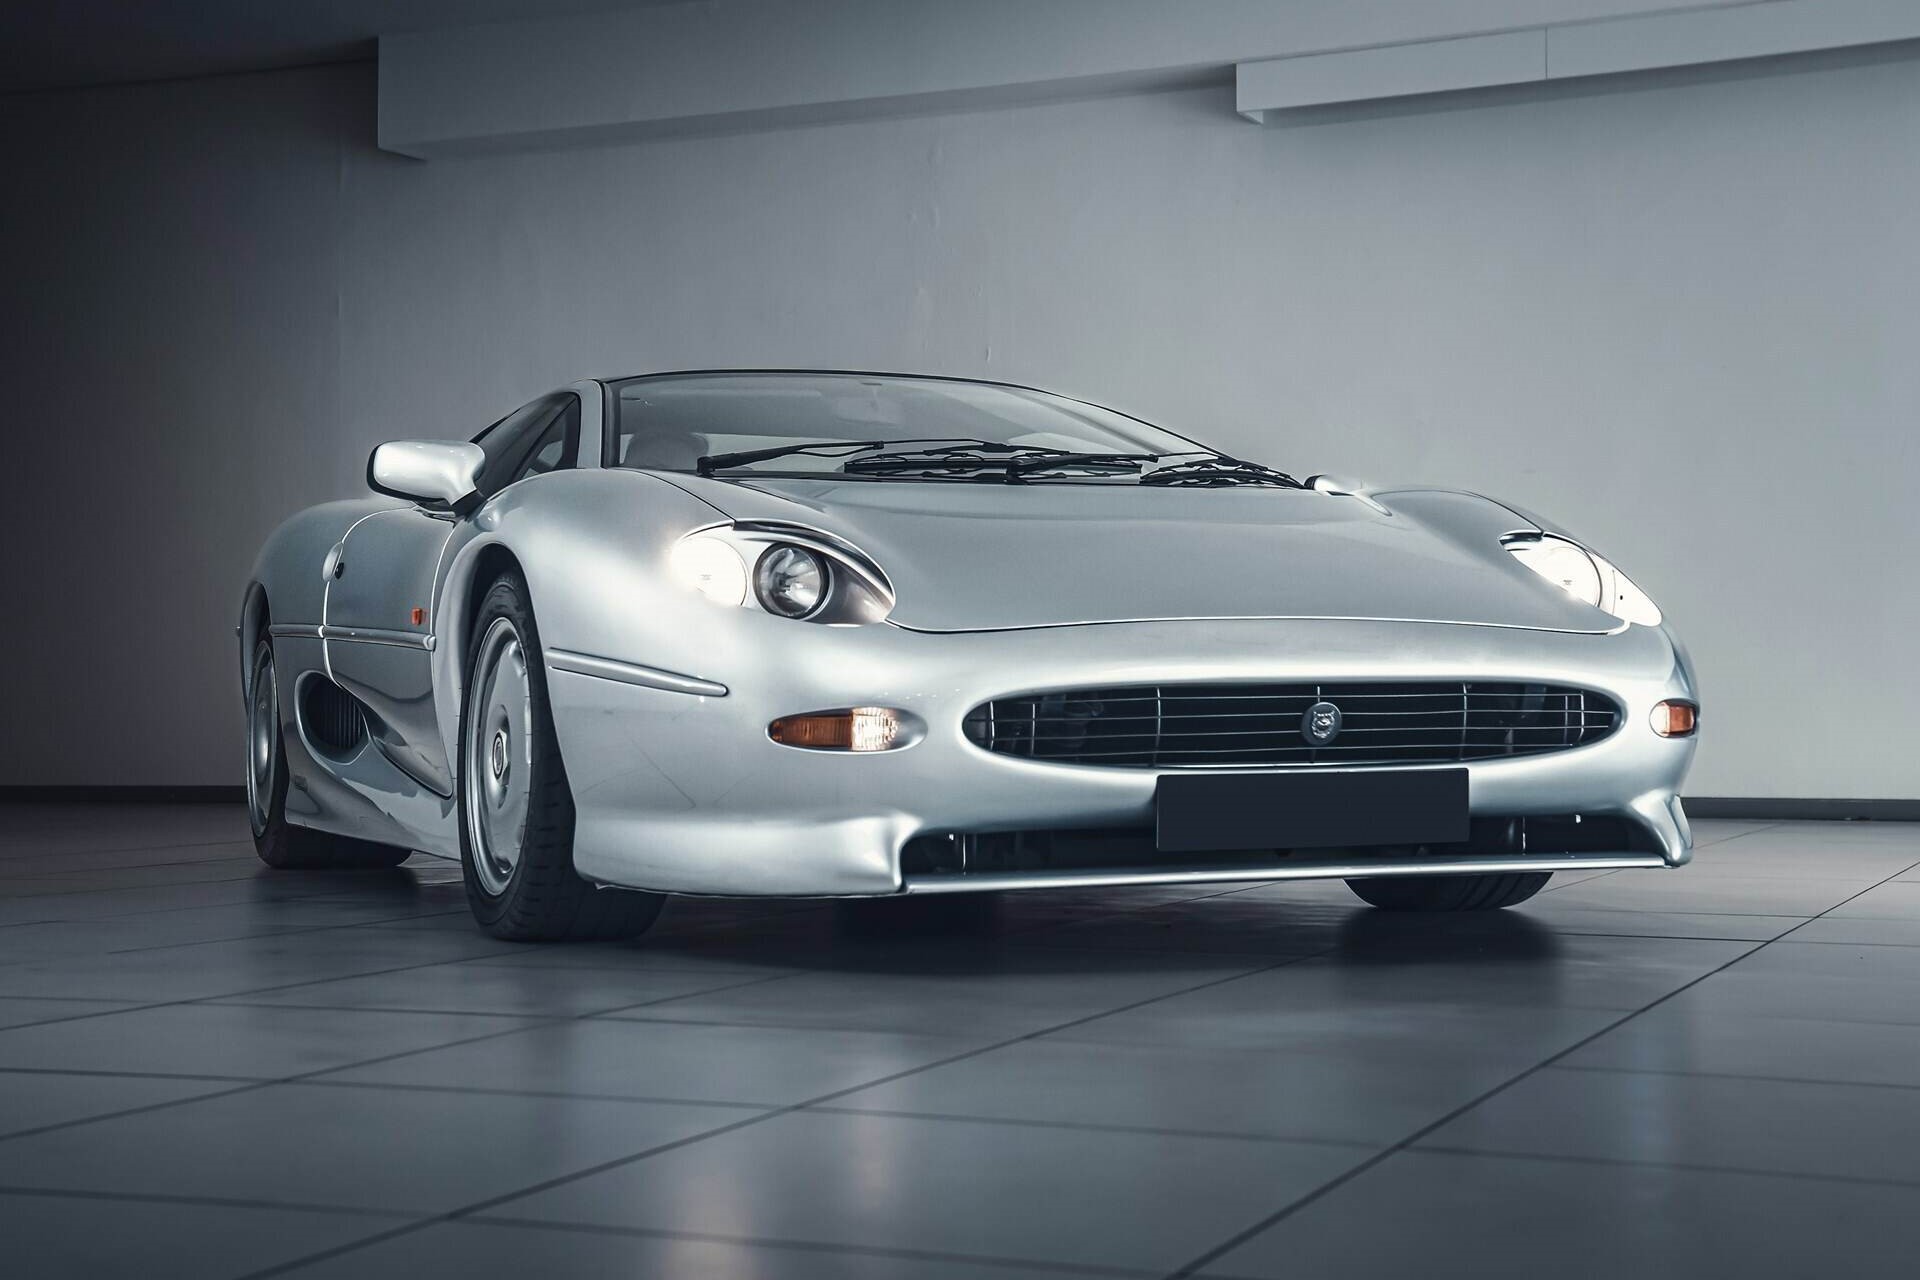 Front angled image of a silver 1993 Jaguar XJ220